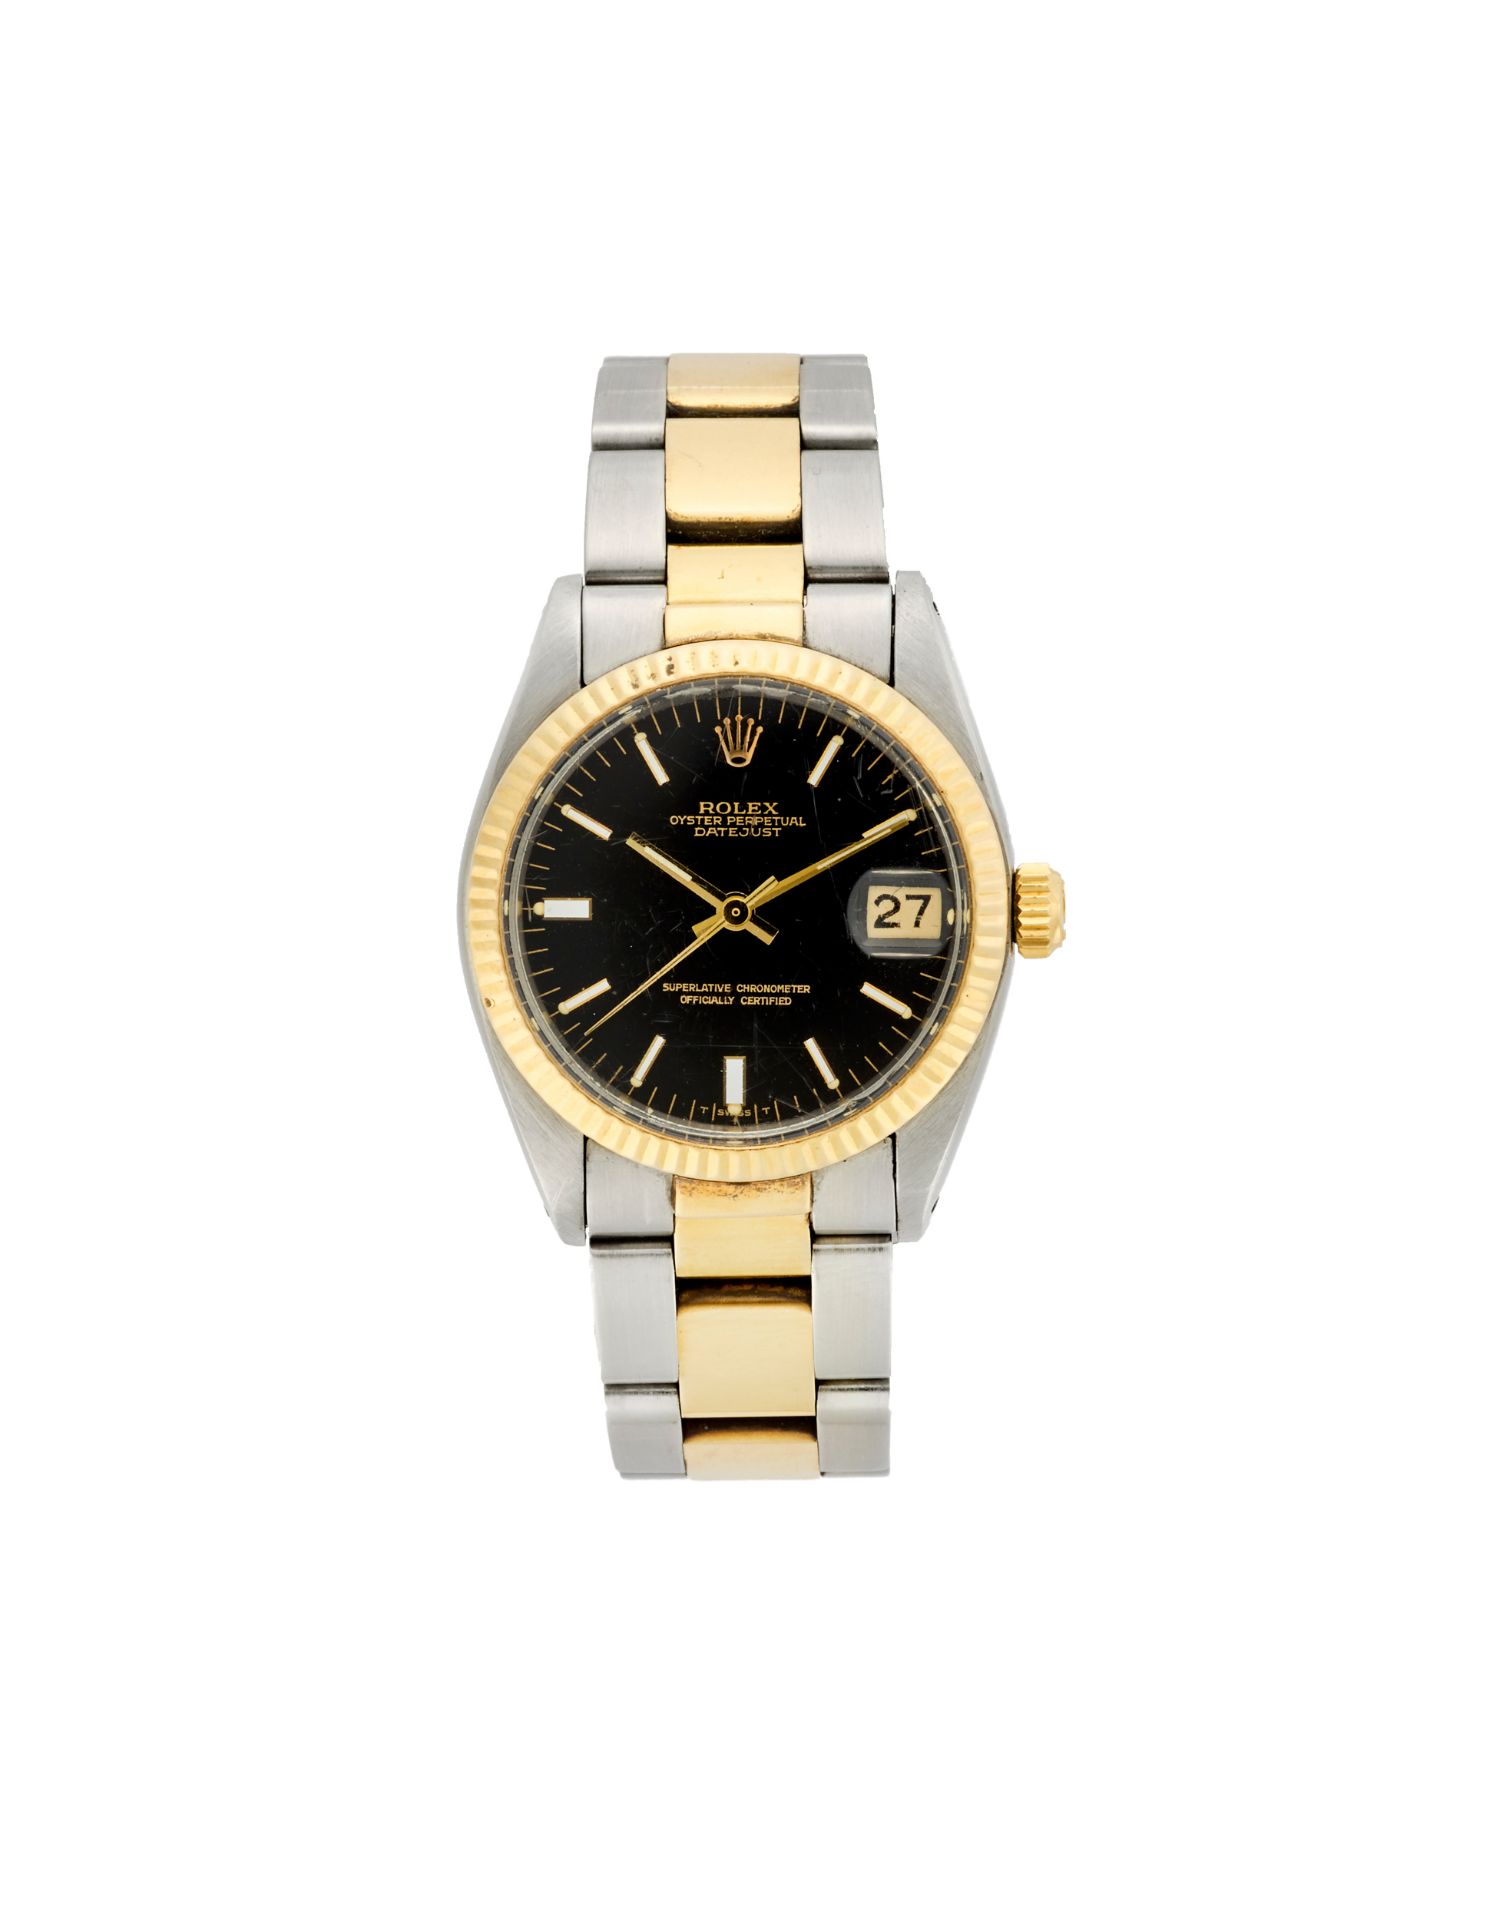 Rolex, DateJust Ref. 6827Lady's steel and gold wristwatch1980sDial signedAutomatic movementBlack